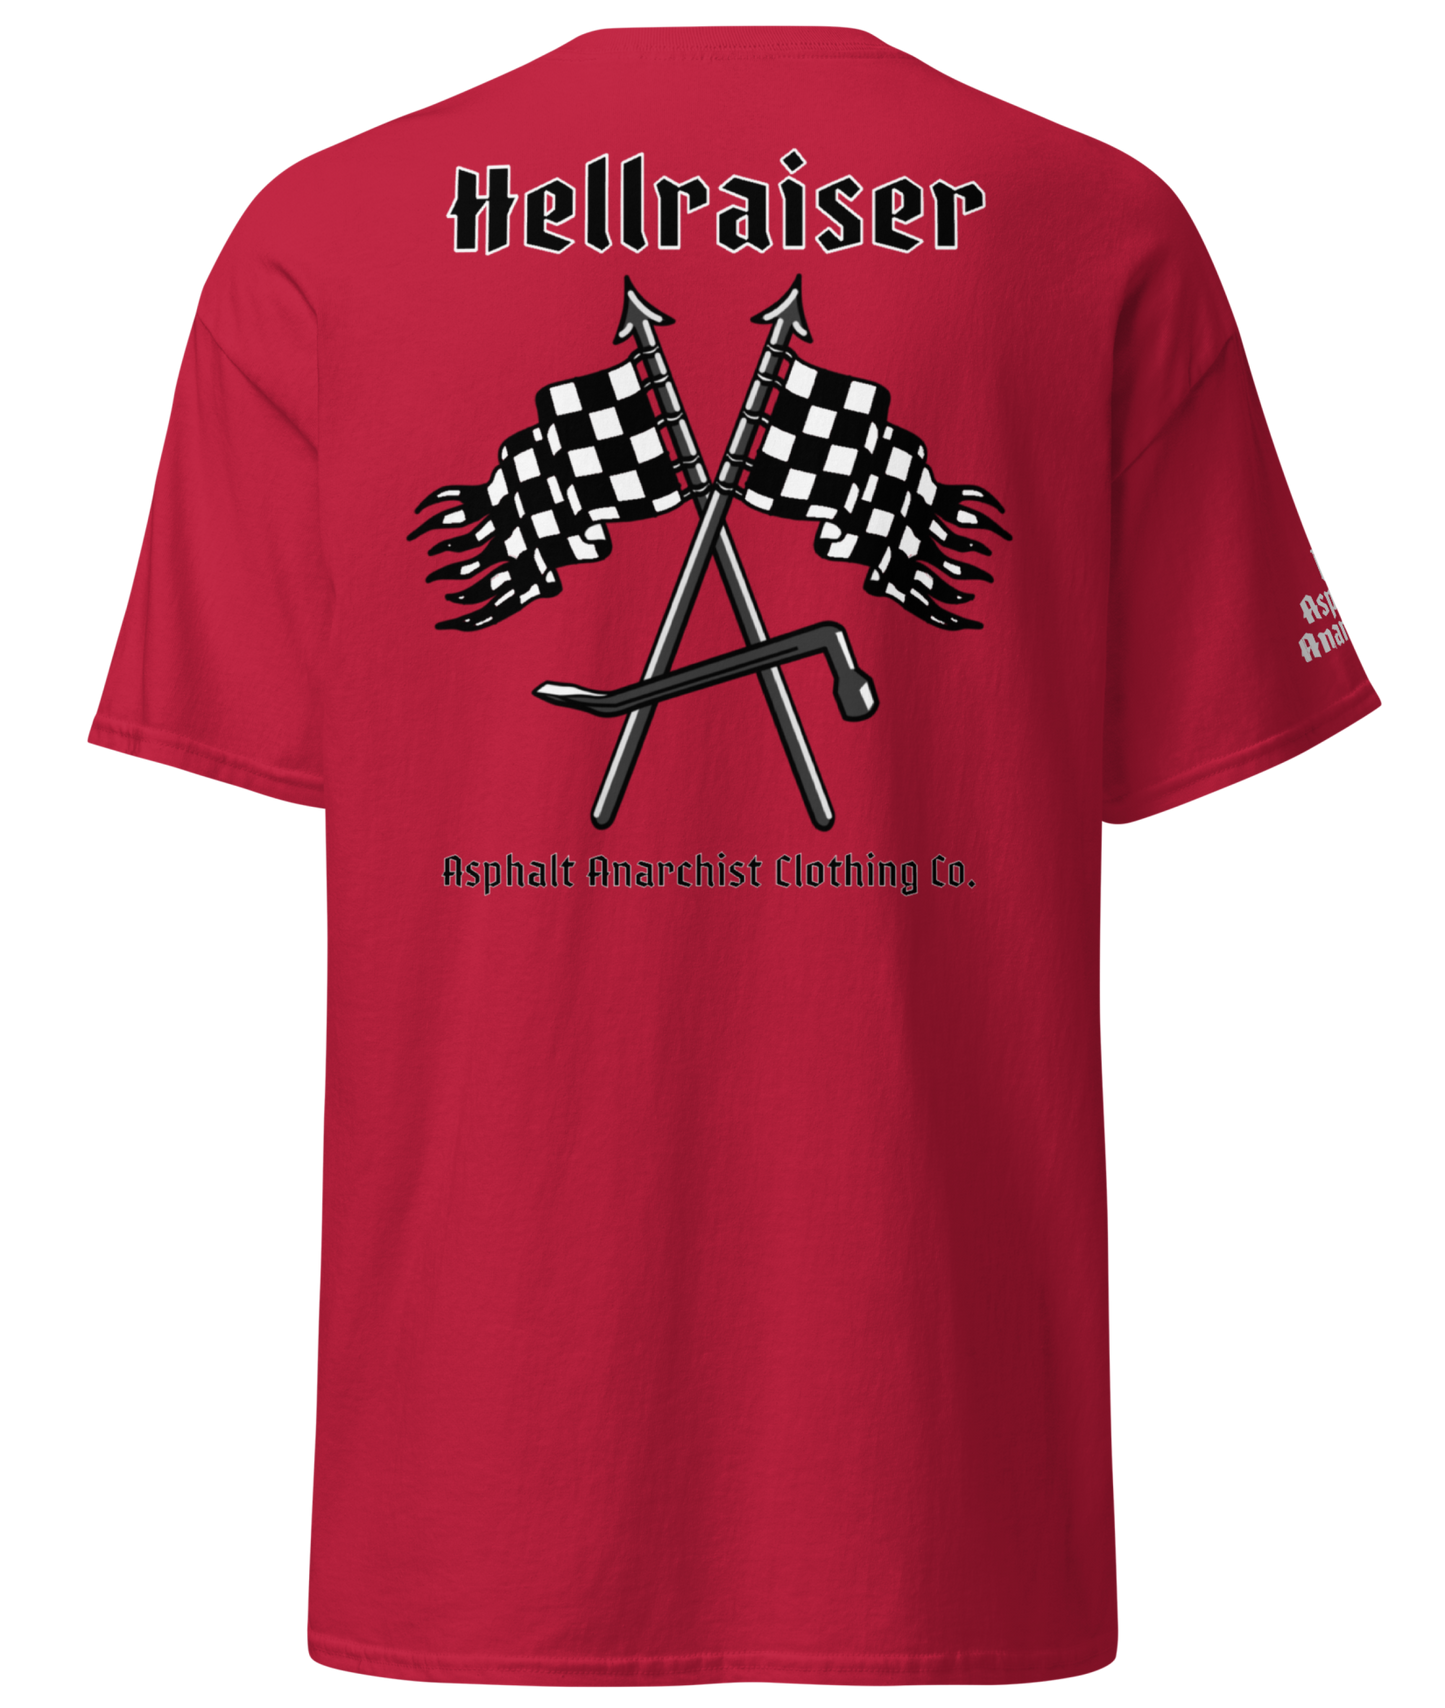 The Hellraiser Tee from Asphalt Anarchist Clothing Co.  HOT ROD KUSTOM KULTURE APPAREL & PRODUCTS